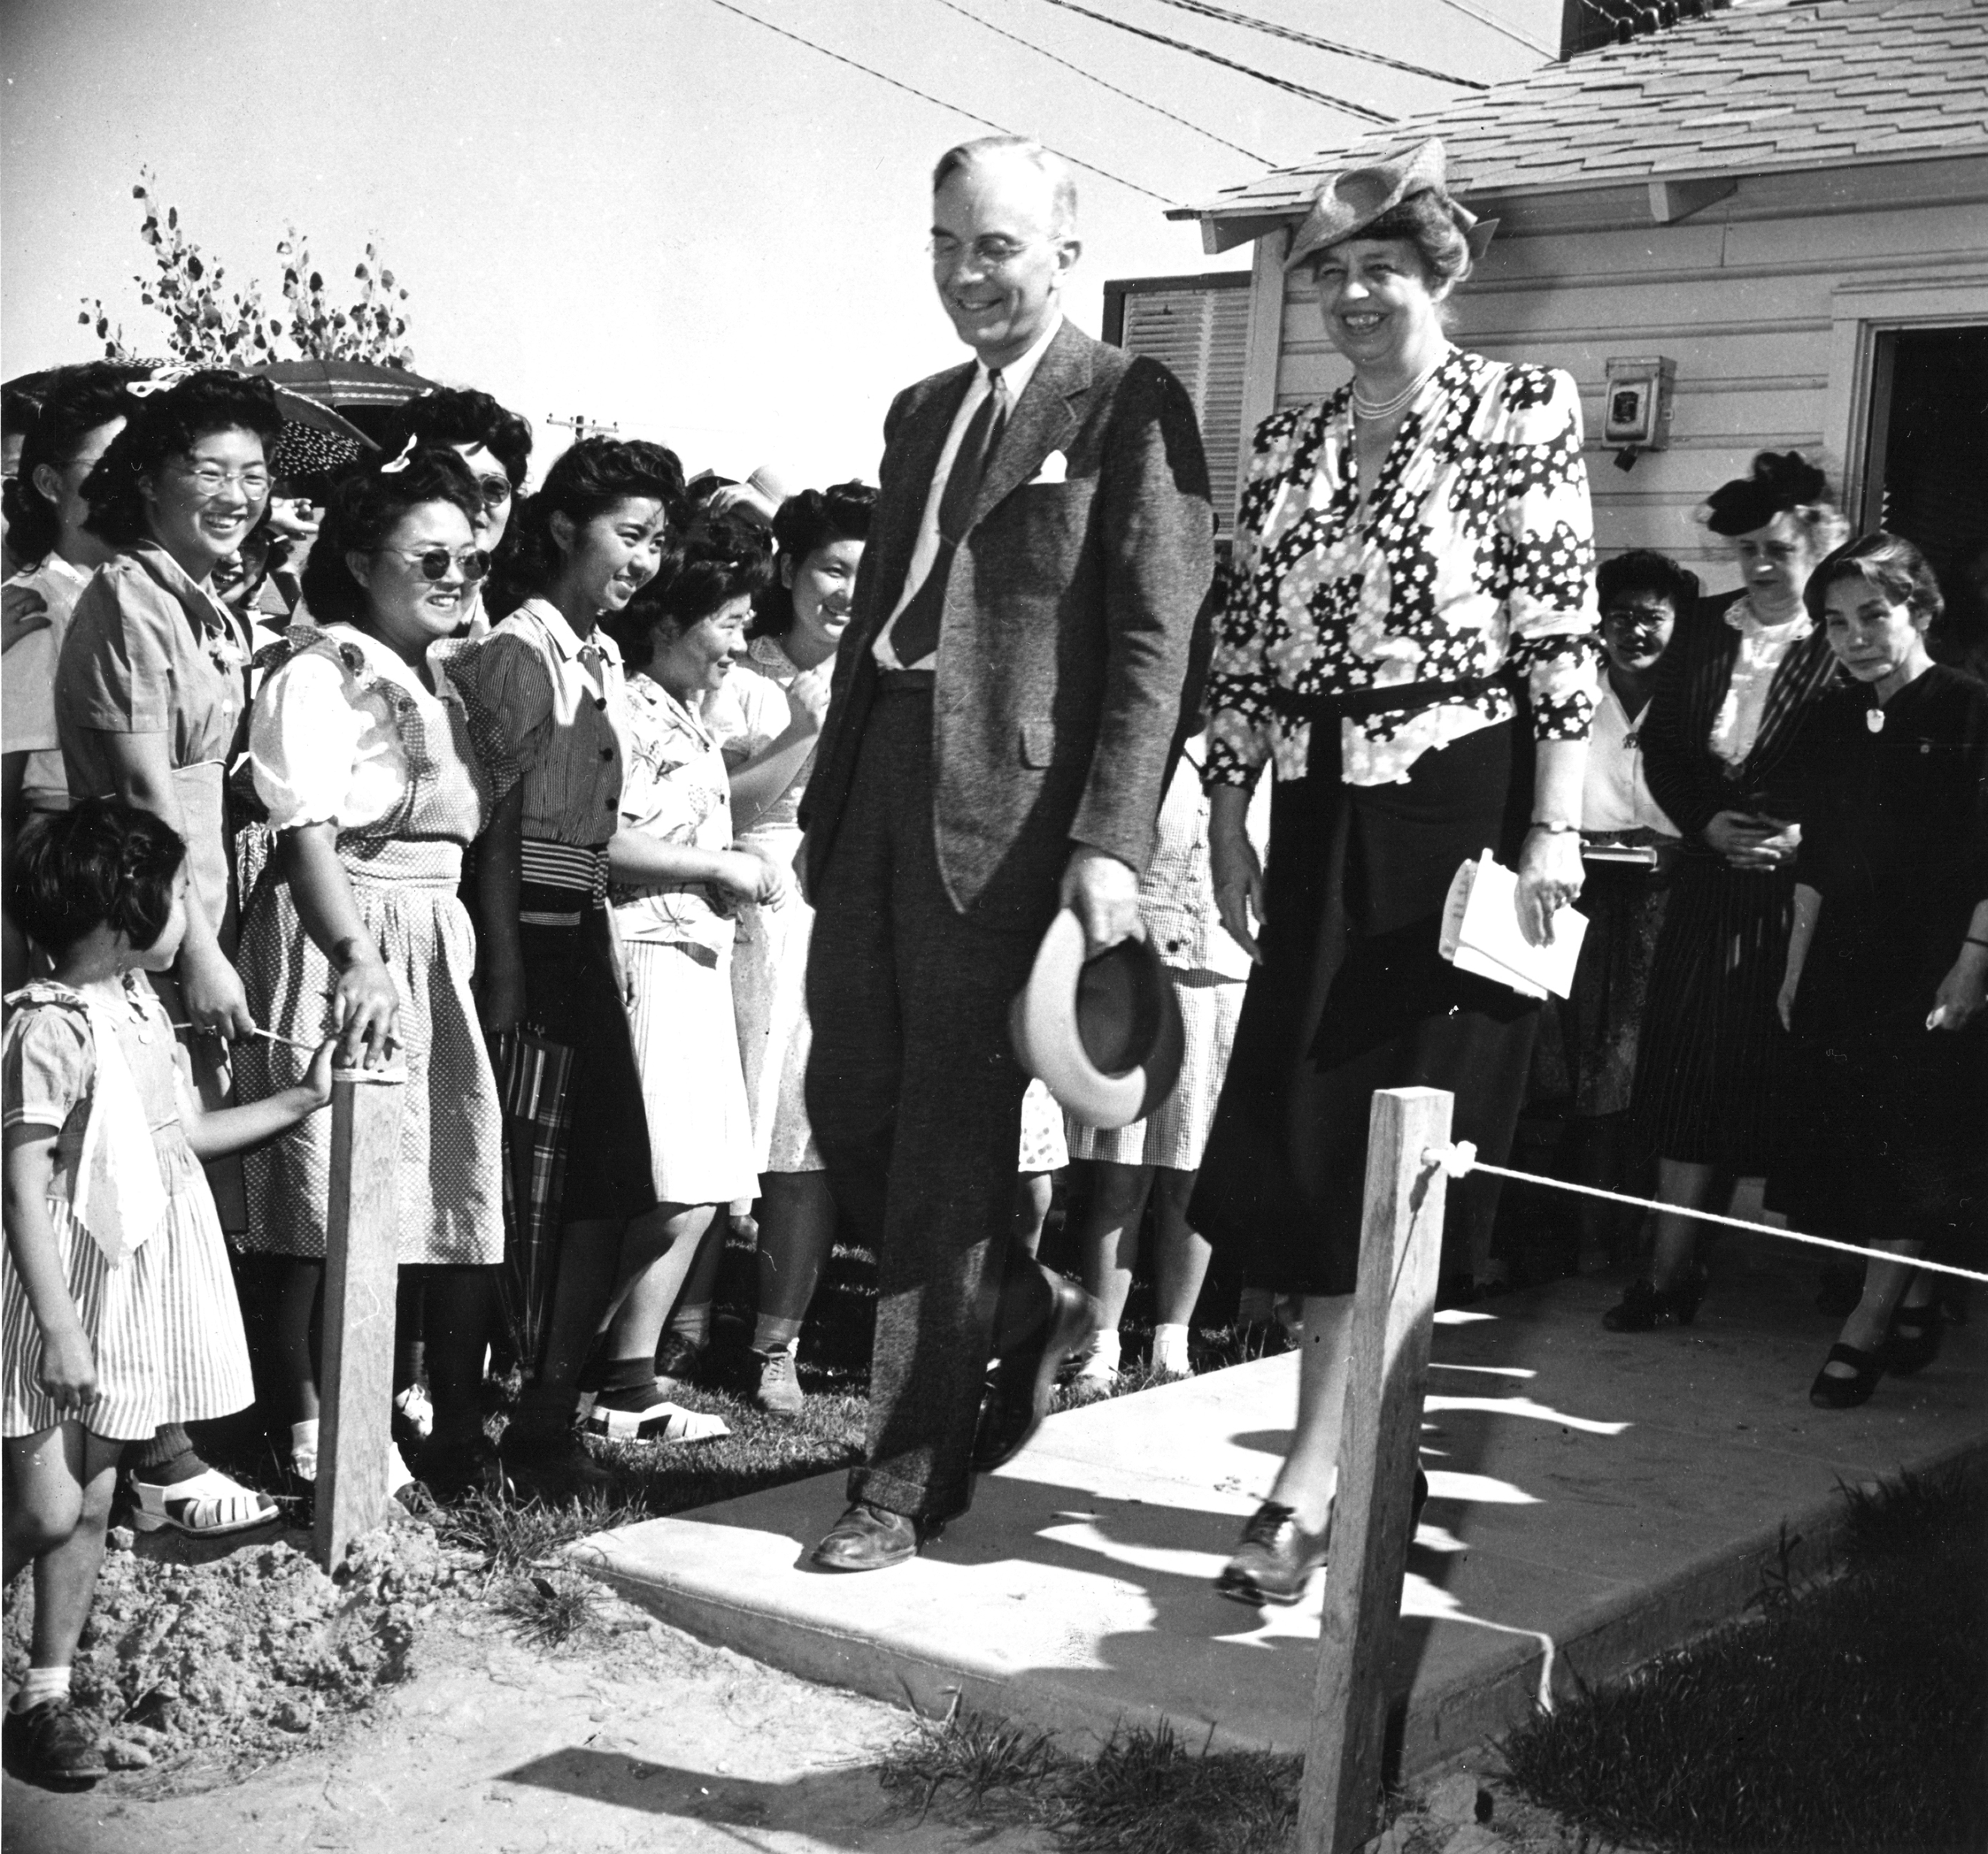 Japanese Americans at the Gila River Relocation Center in Pinal County, Ariz. greet First Lady Eleanor Roosevelt and Dillon S Myer, director of the War Relocation Authority, during their tour of the internment camp on Apr. 23, 1943. (Francis Stewart—PhotoQuest/Getty Images)